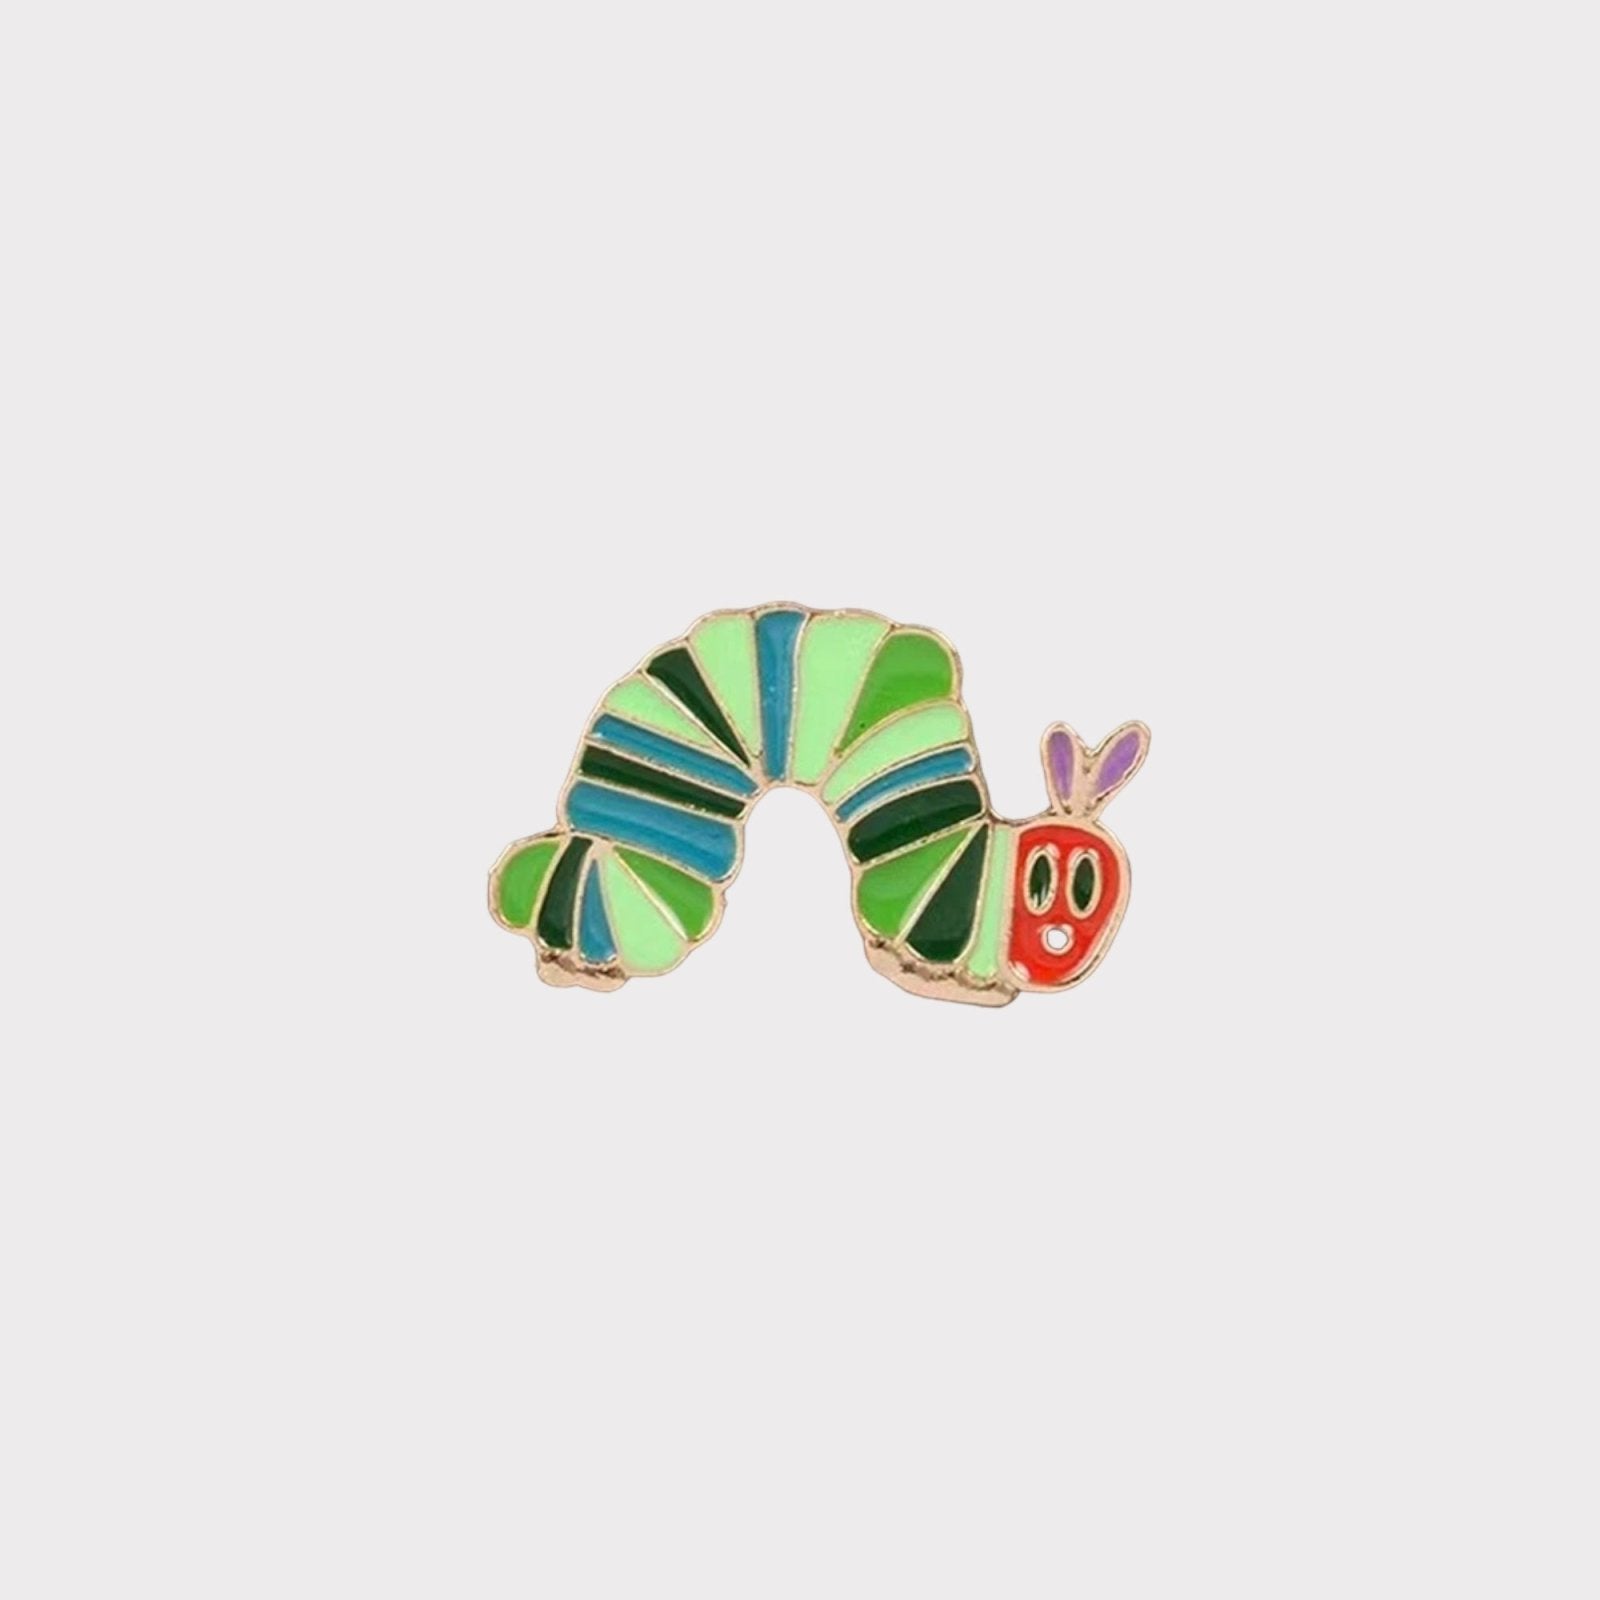 Raupen Emaille Pin find Stylish Fashion for Little People- at Little Foxx Concept Store